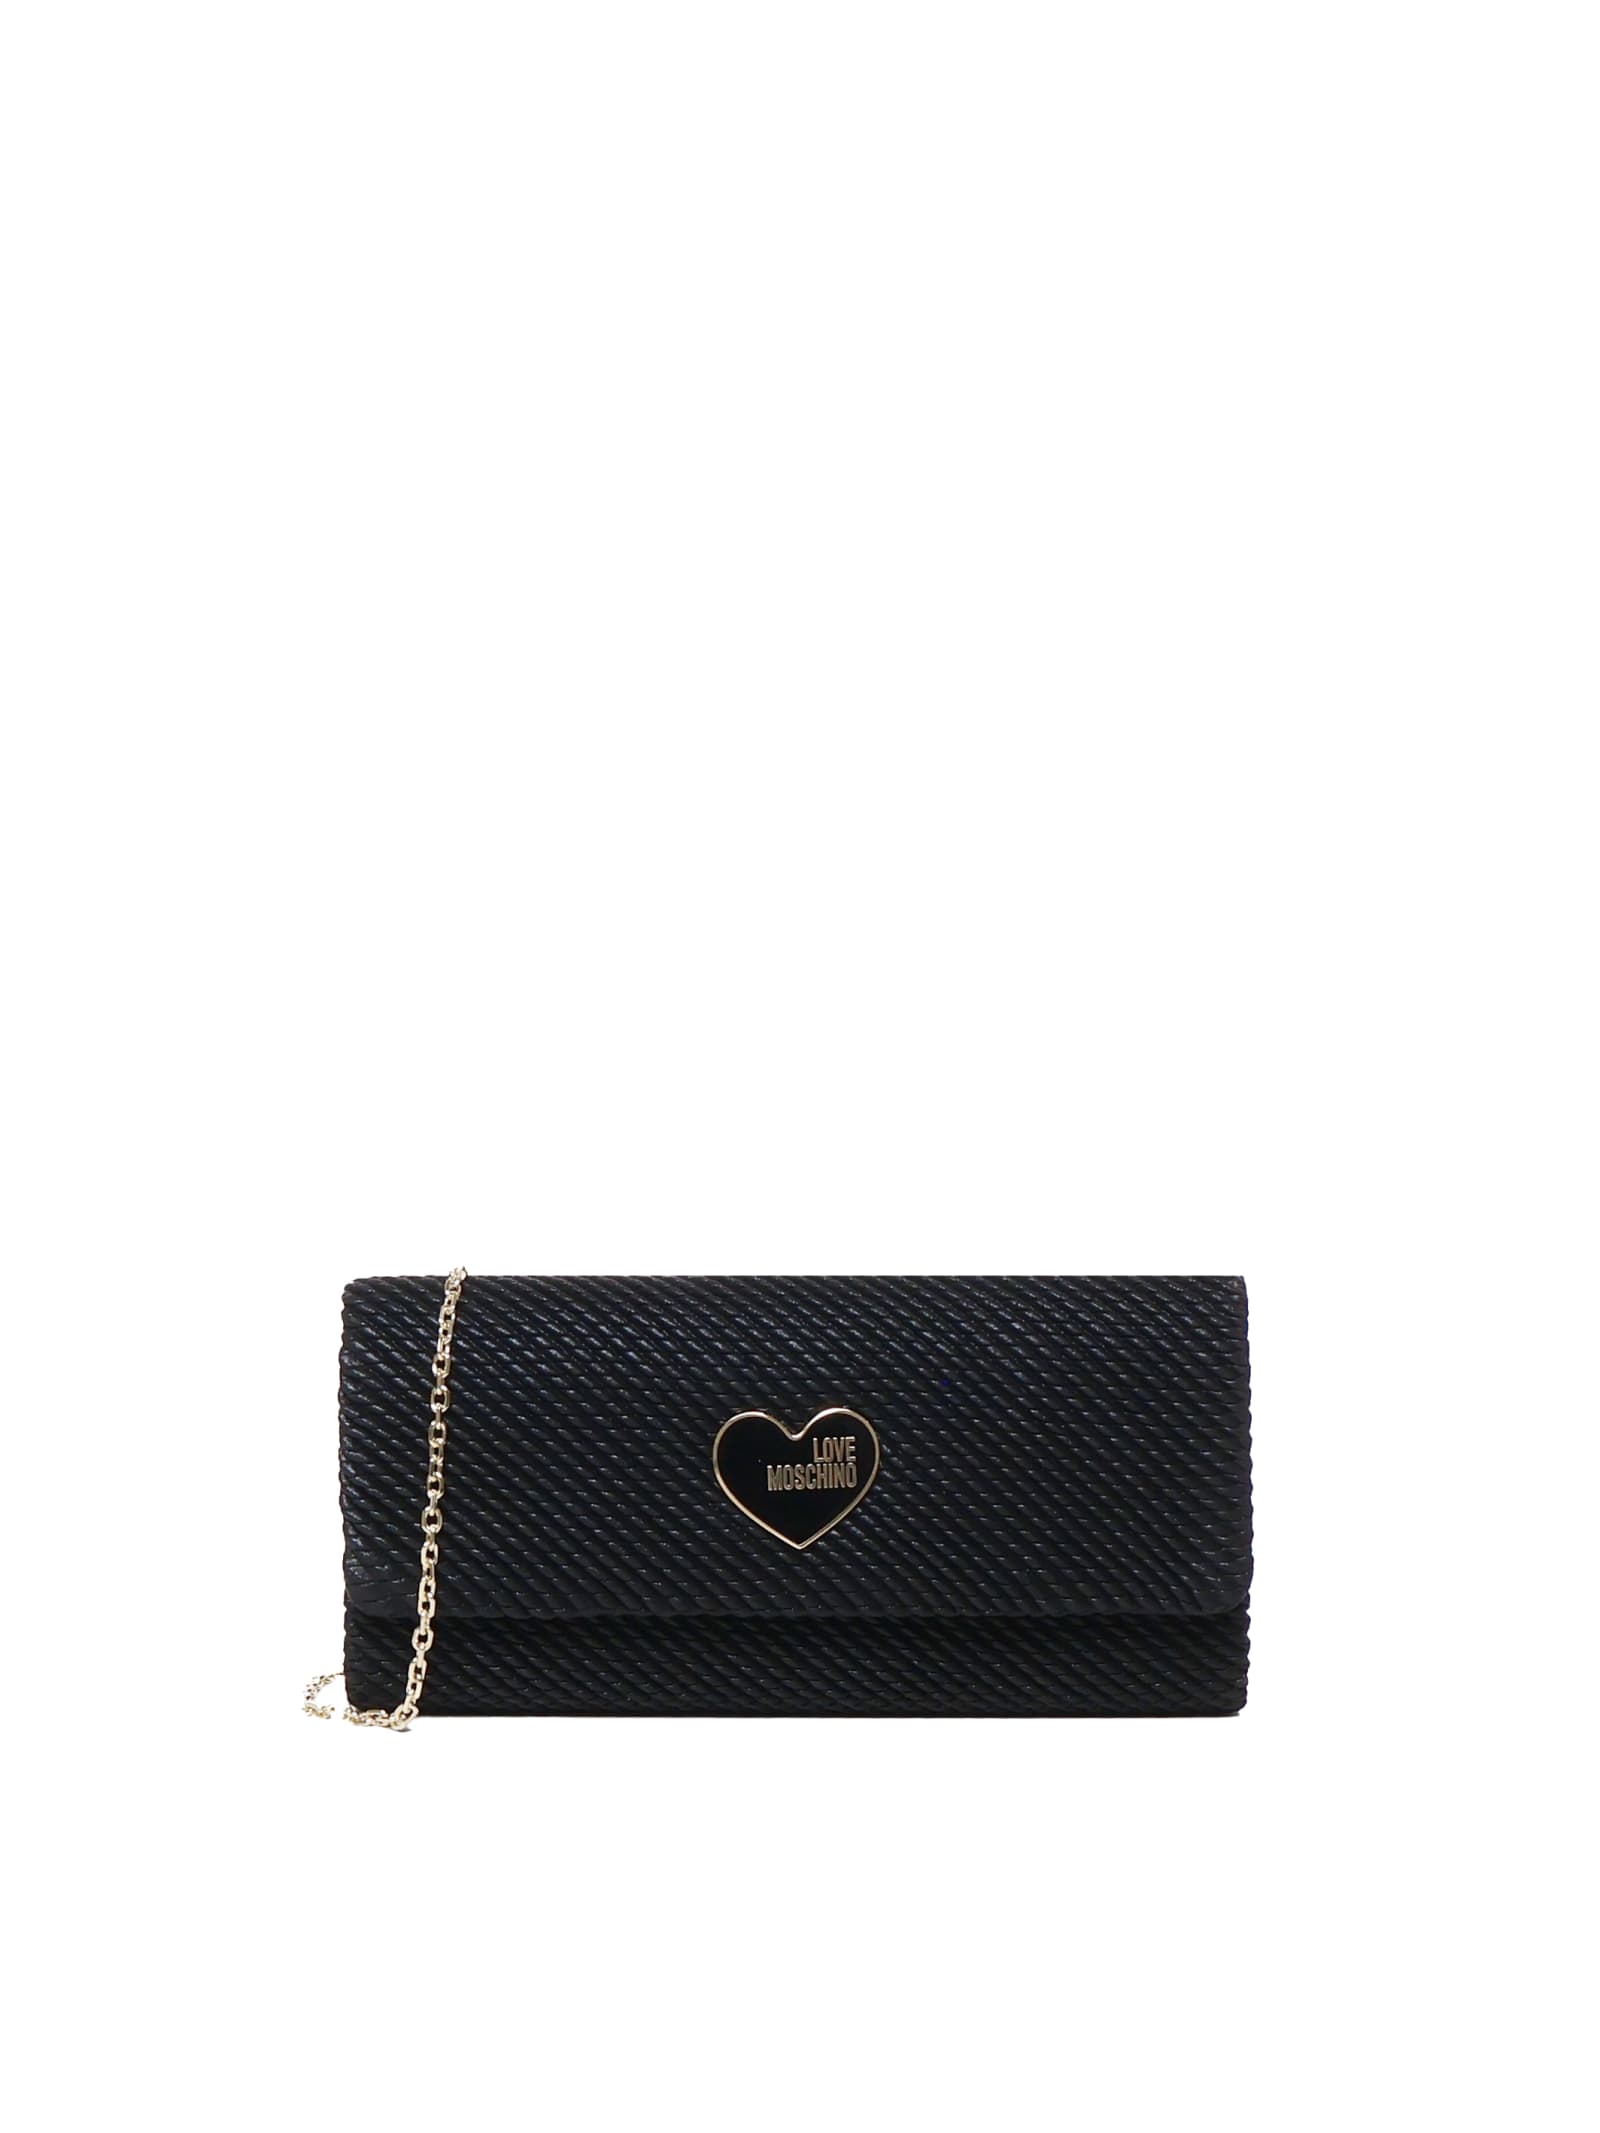 Clutch Bag With Thin Shoulder Strap